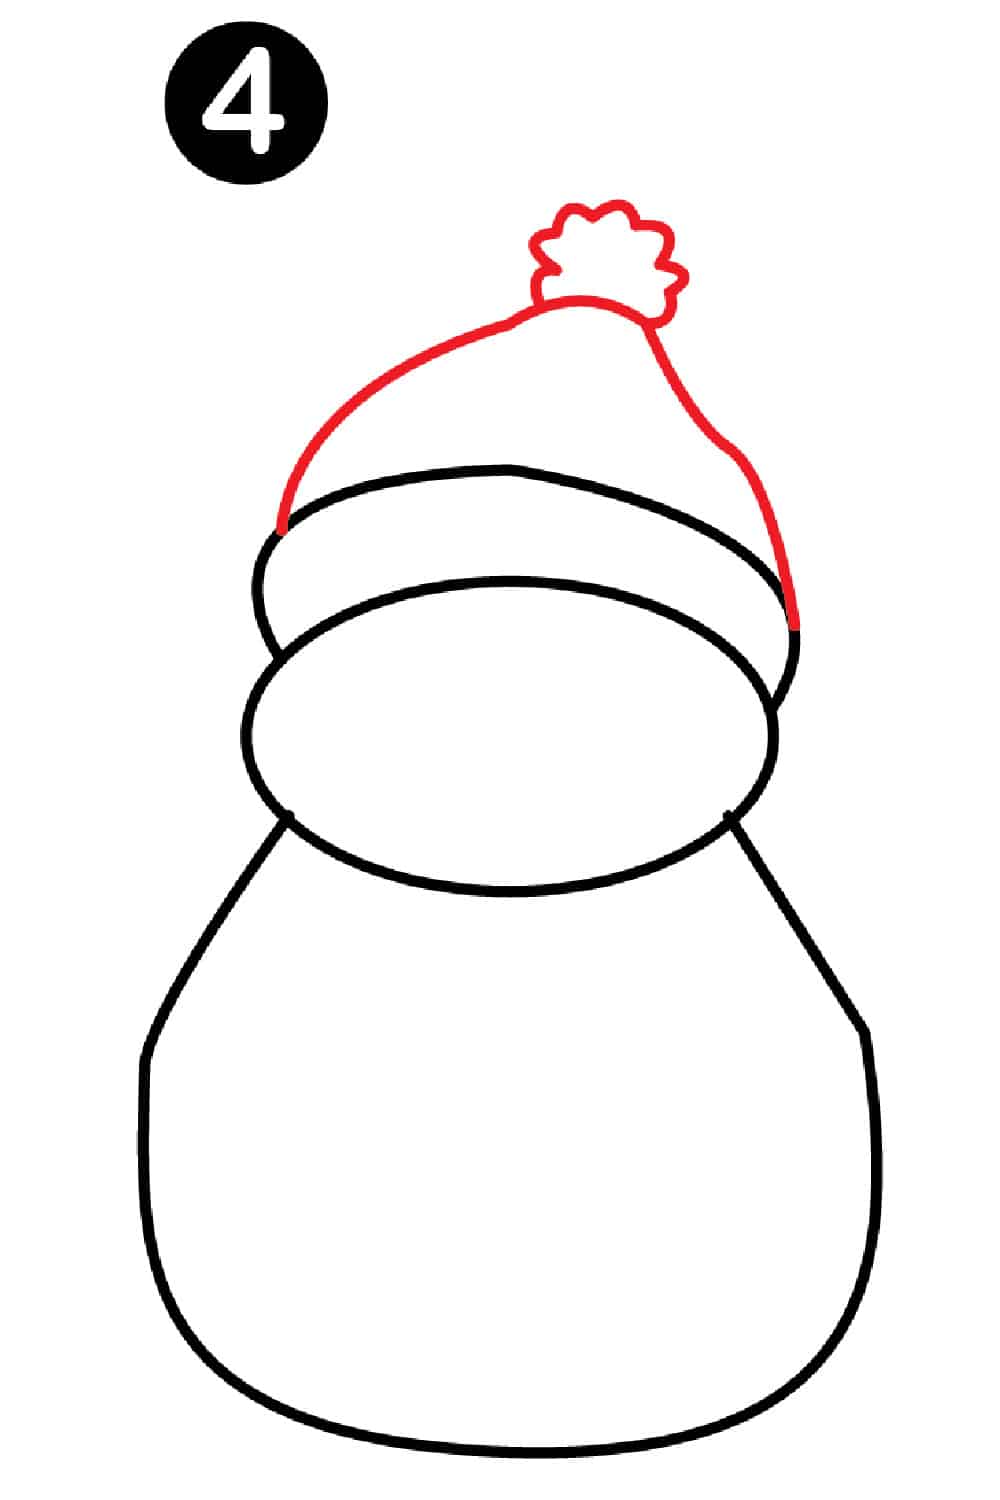 How to Draw a Snowman 4th Step